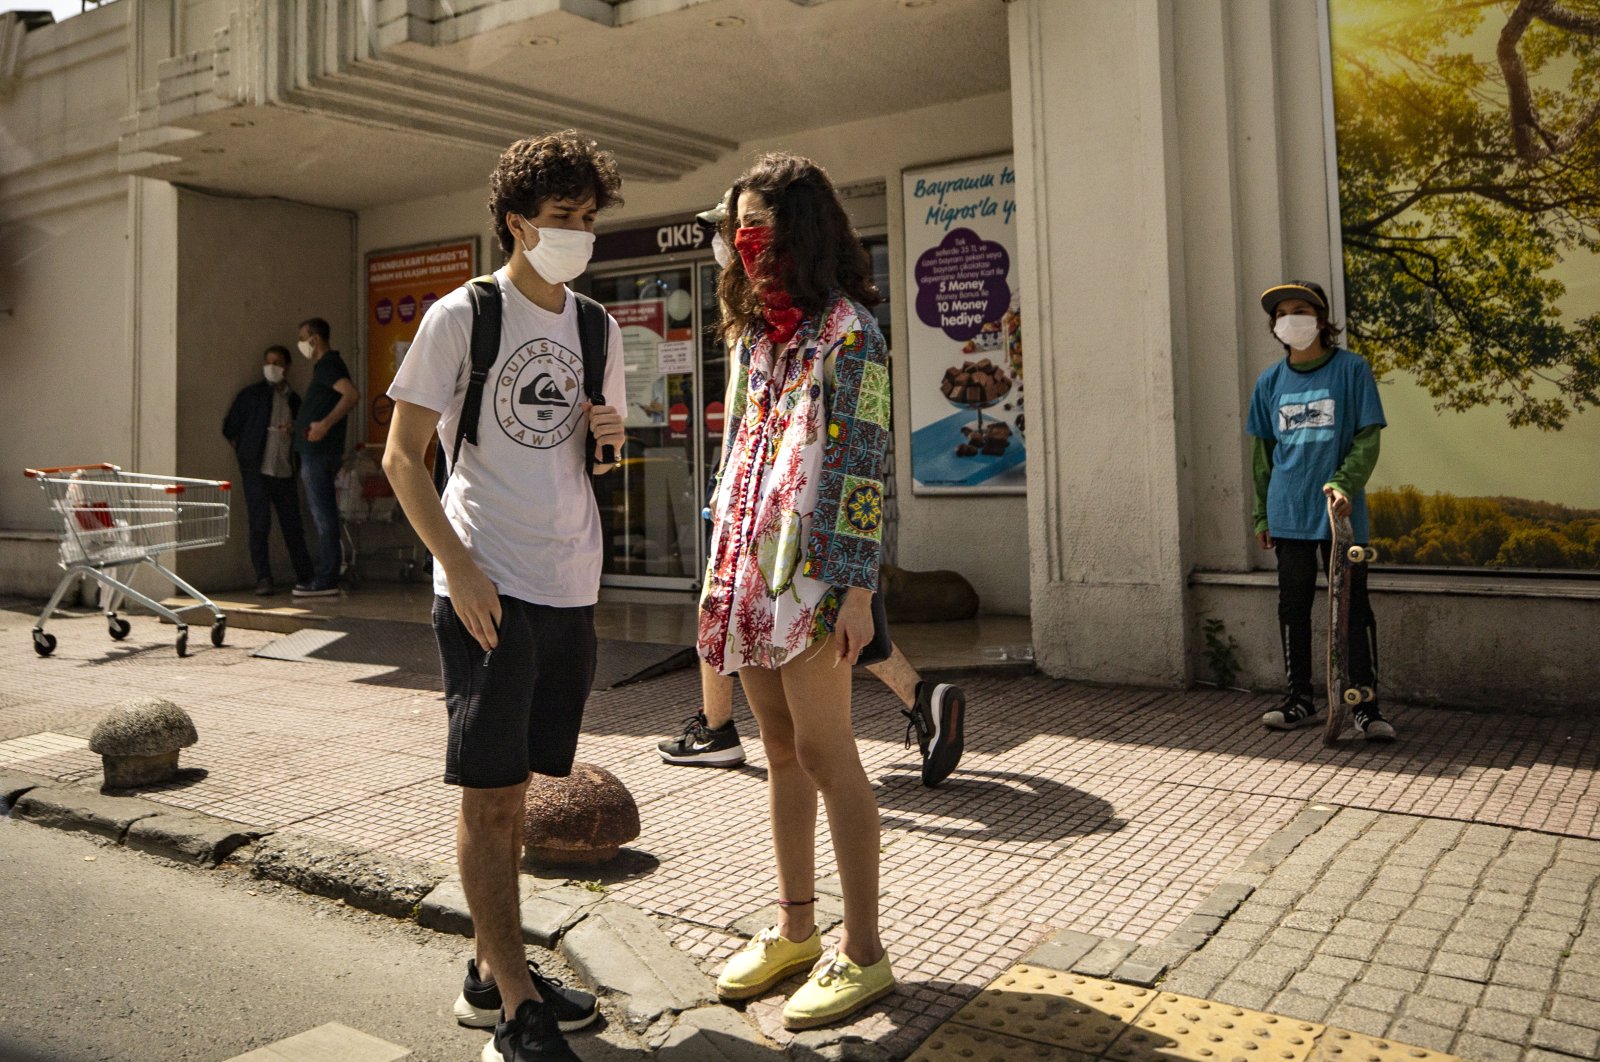 Two teenagers enjoy a day outside after youth ages 15 to 20 were allowed to go out for a limited time as part of eased coronavirus restrictions, Istanbul, Turkey, May 15, 2020. (AA Photo)